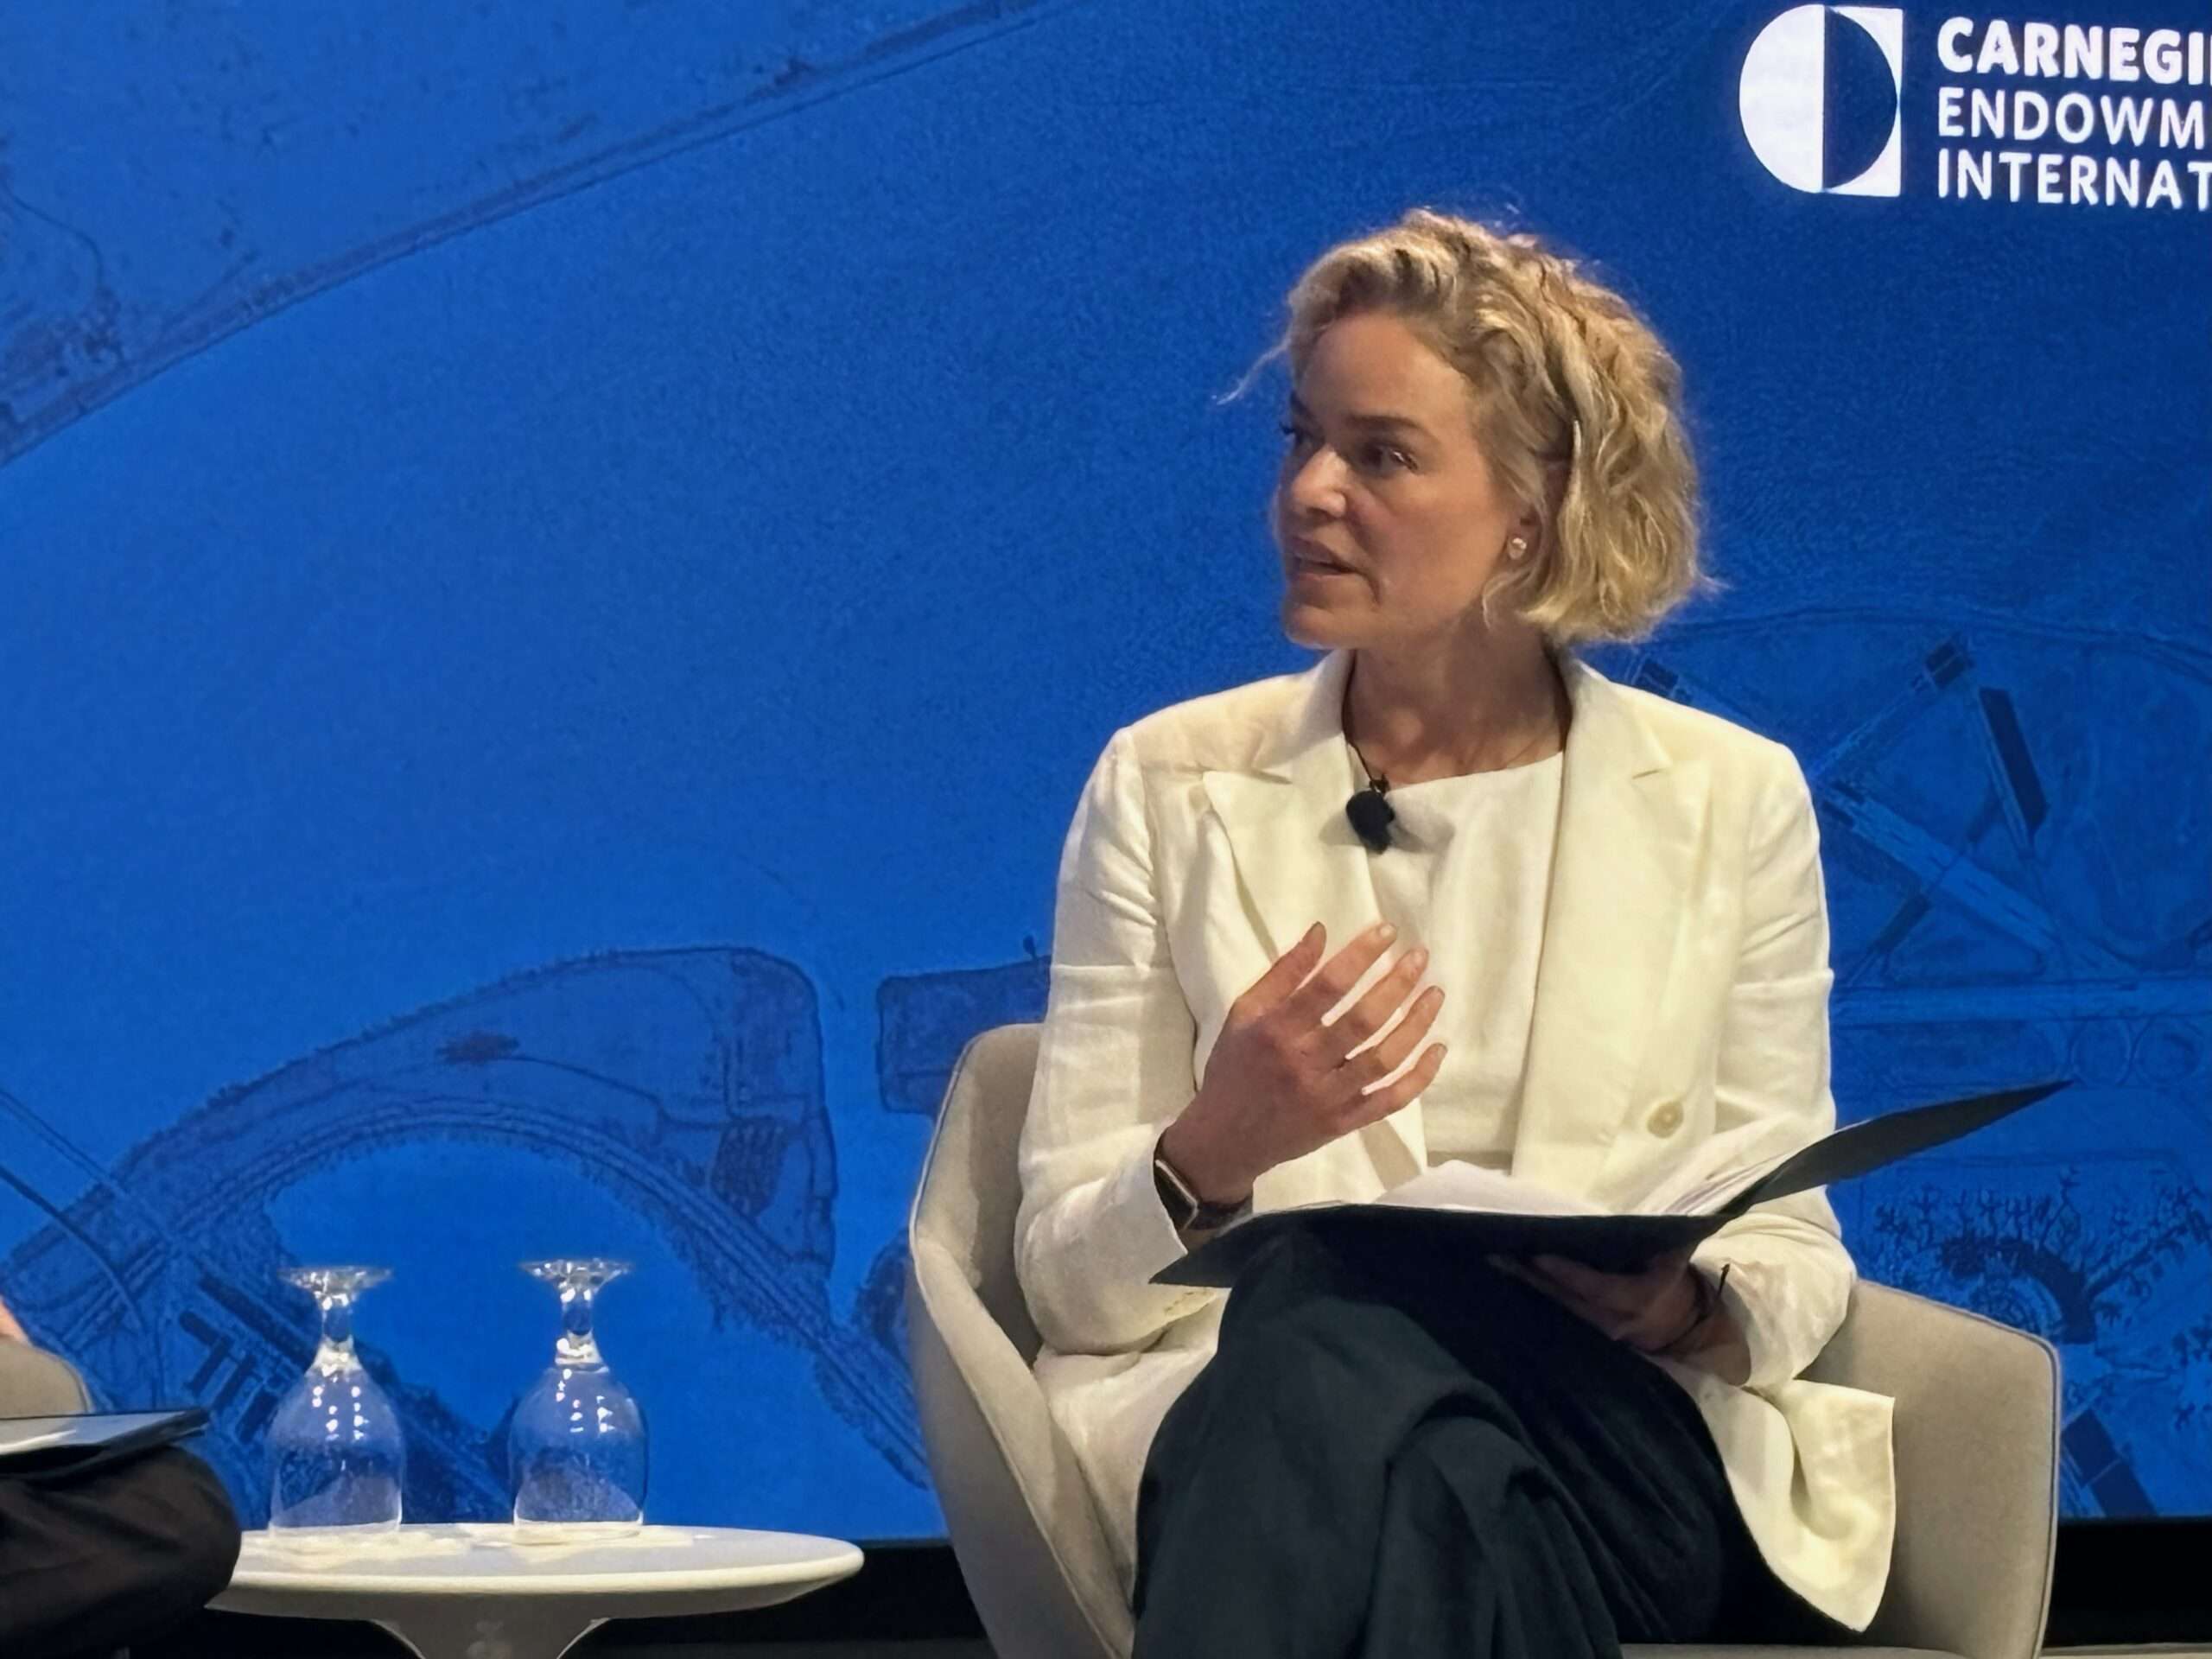 NPR's Katherine Maher is not taking questions about her tweets